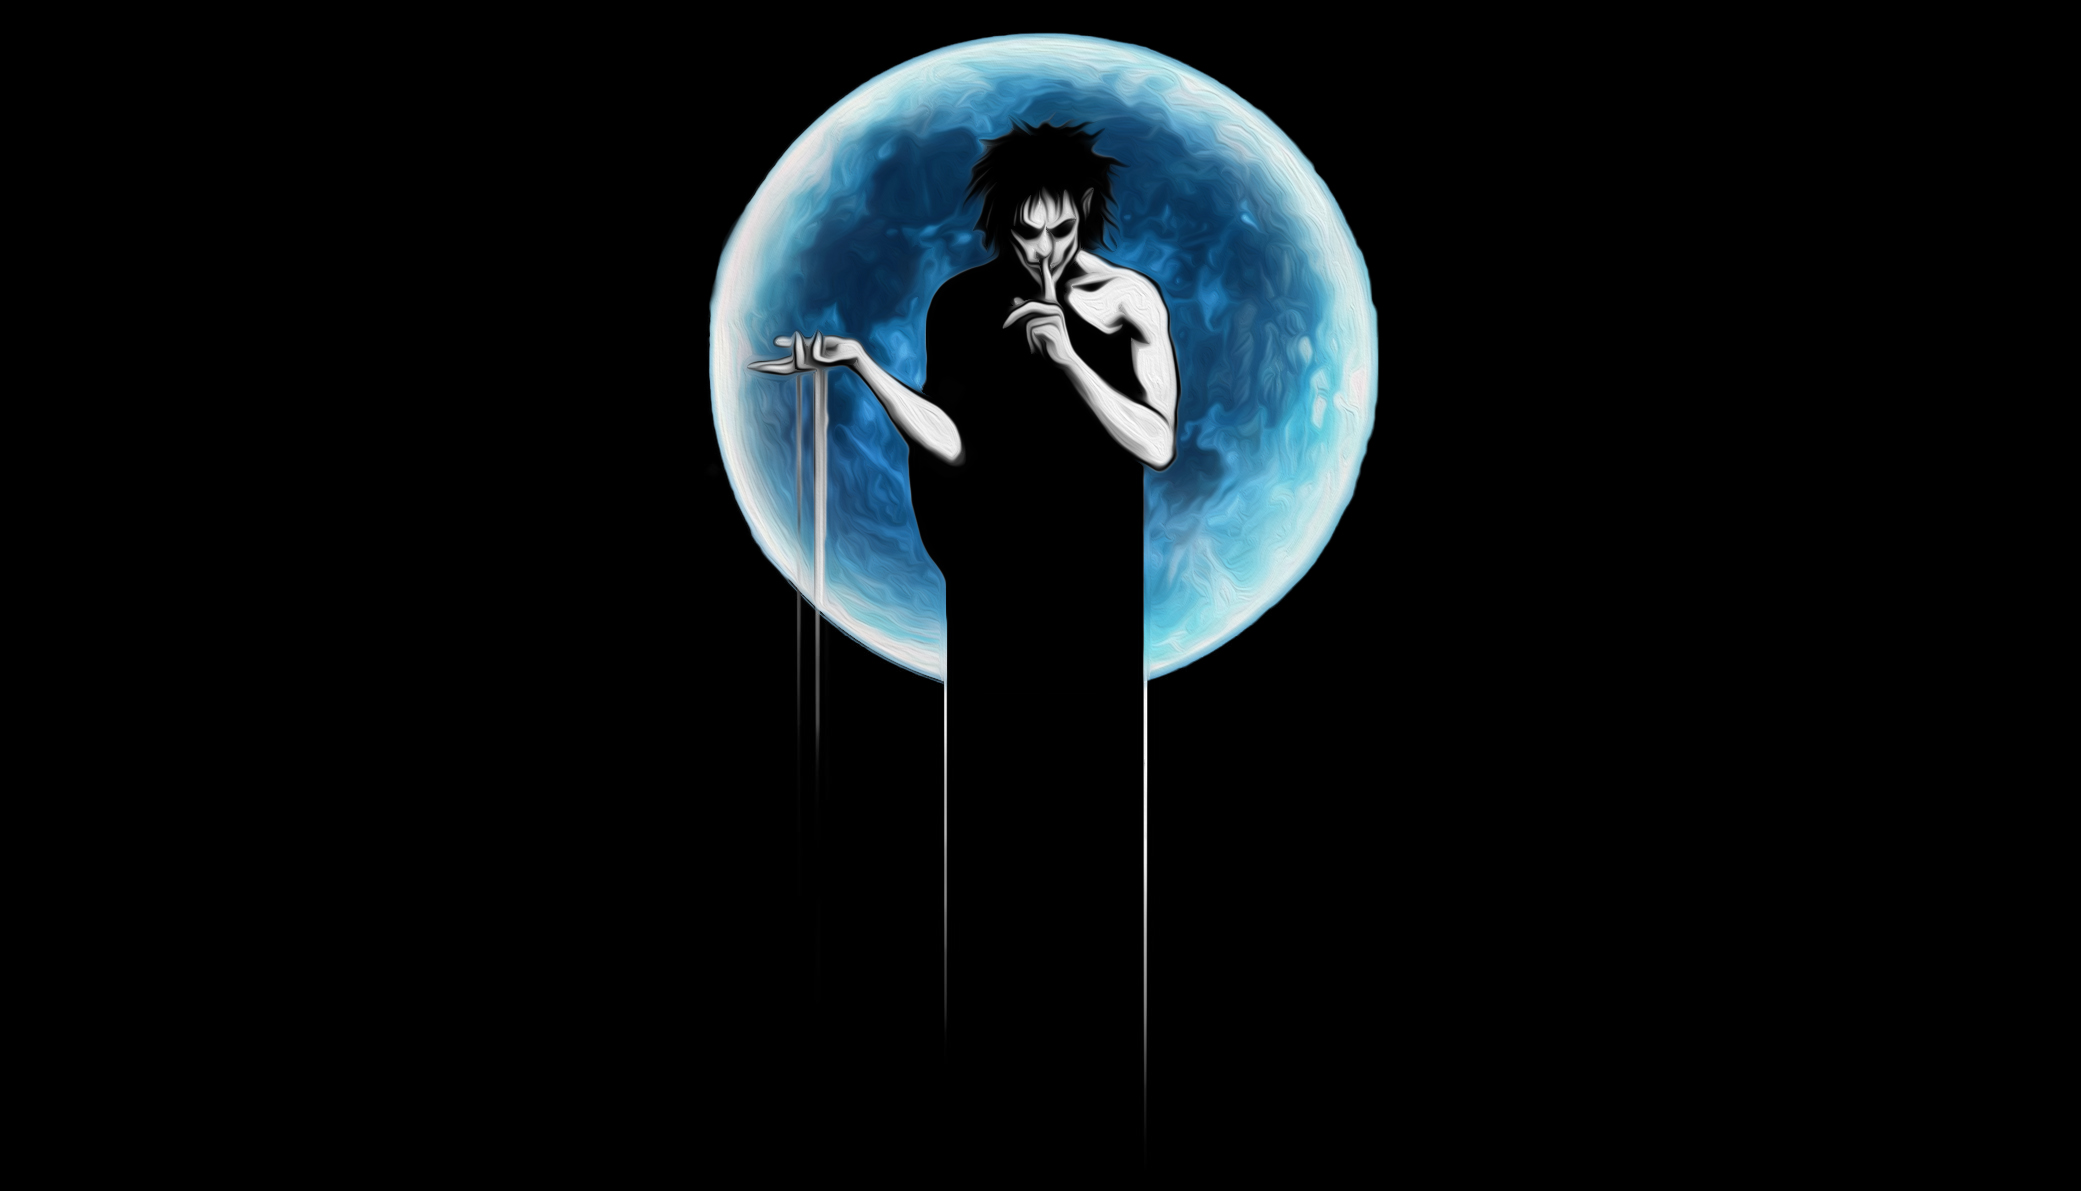 Vkv HD Widescreen Awesome Sandman Image Collection